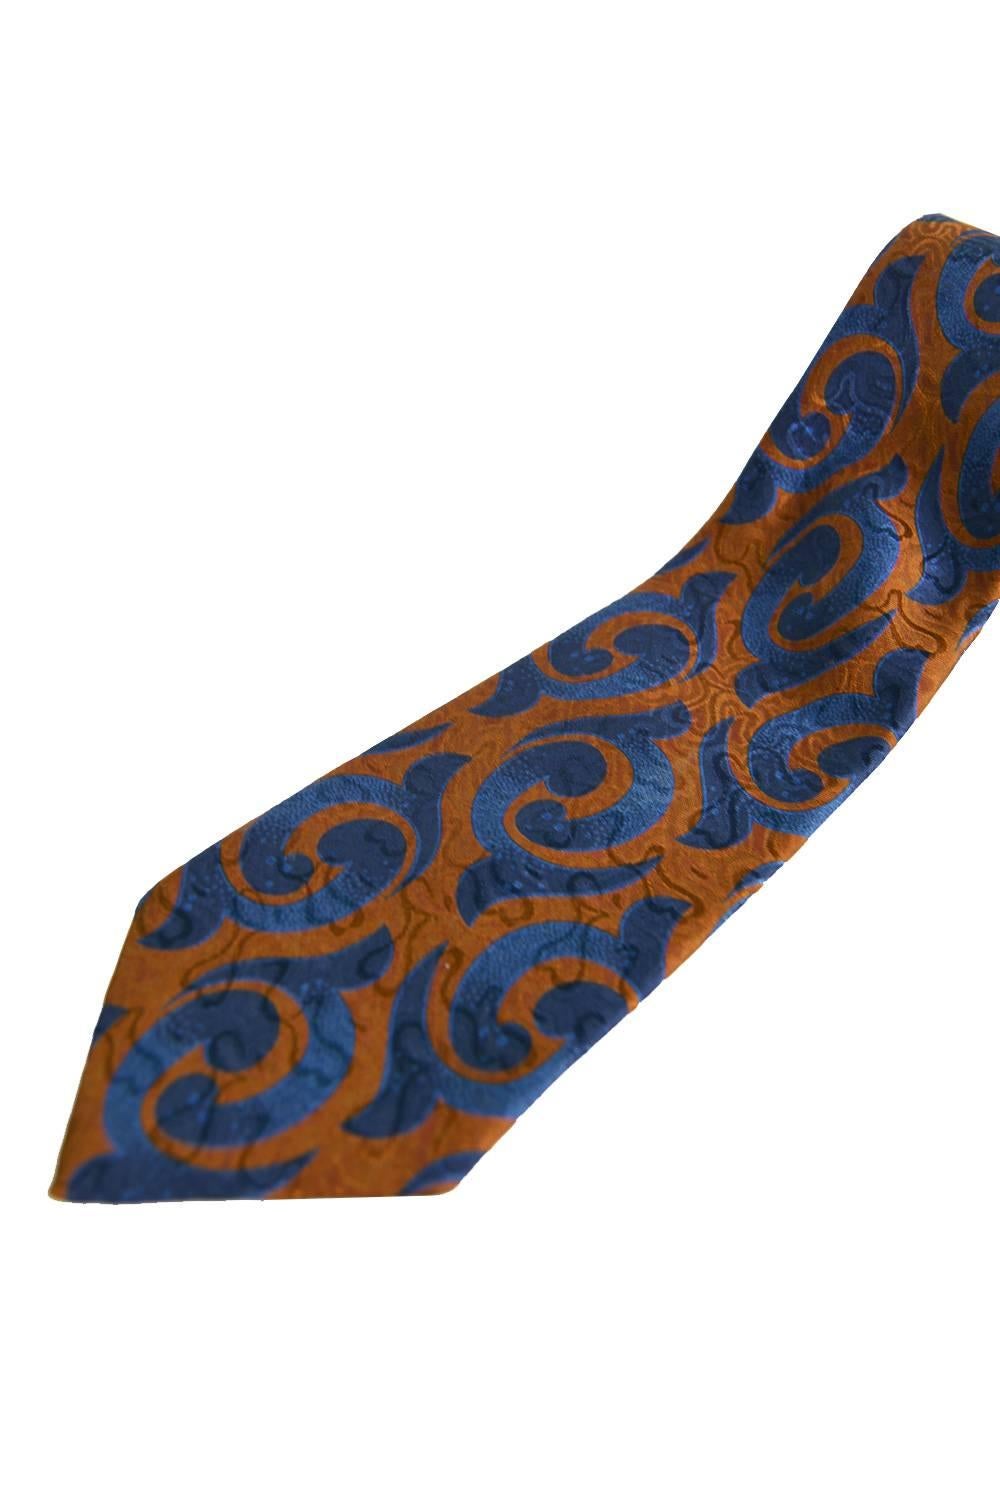 A classic vintage mens necktie from the 80s by French luxury fashion house, Pierre Balmain. In a dark orangey-brown and blue silk with a satin jacquard throughout.

Total length - 58